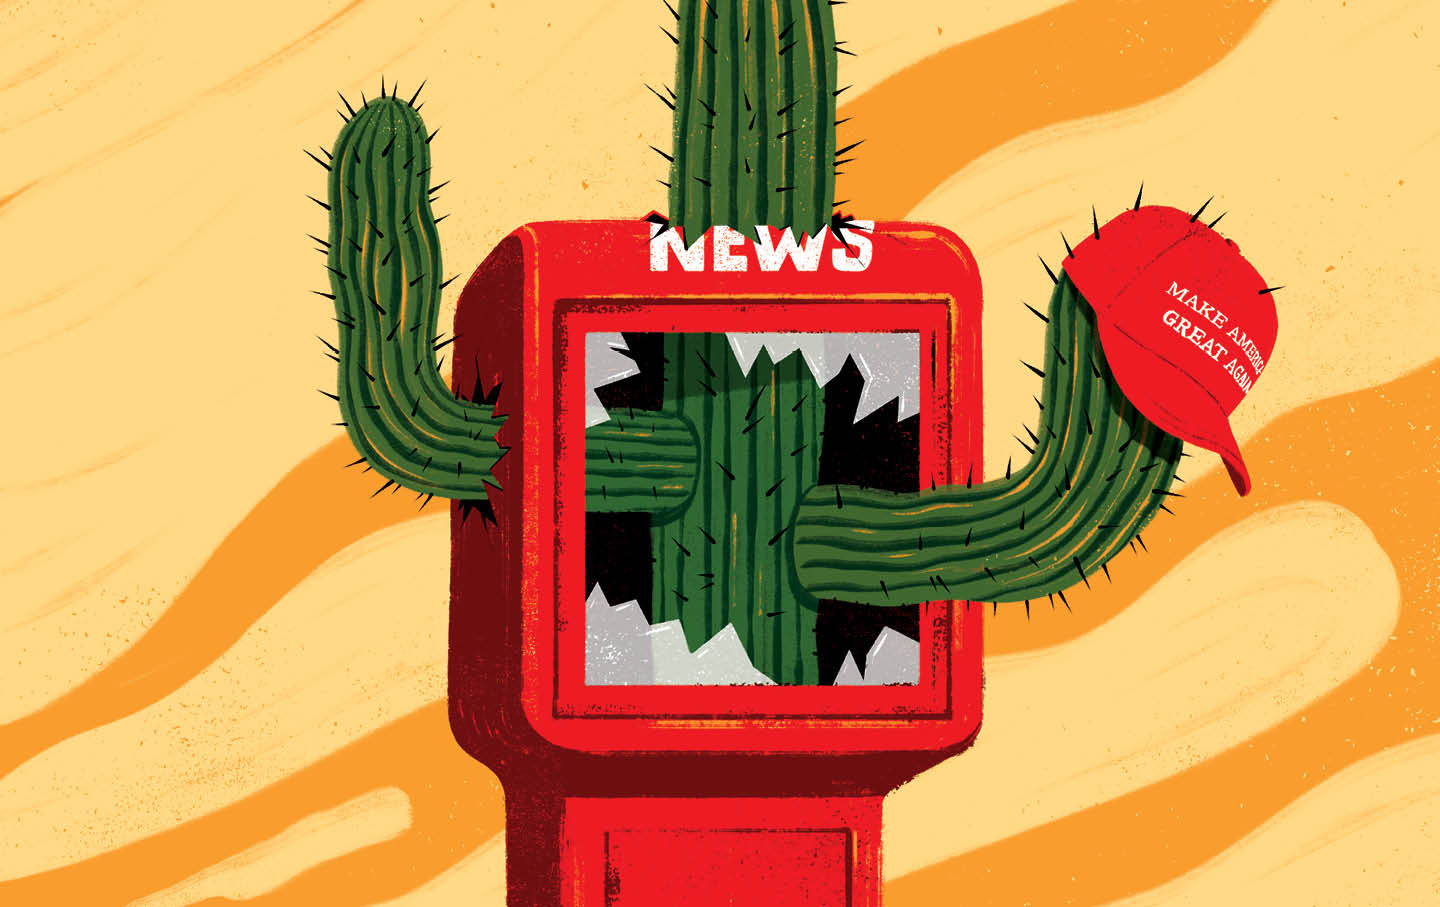 Local News Has Been Destroyed. Here’s How We Can Revive It.